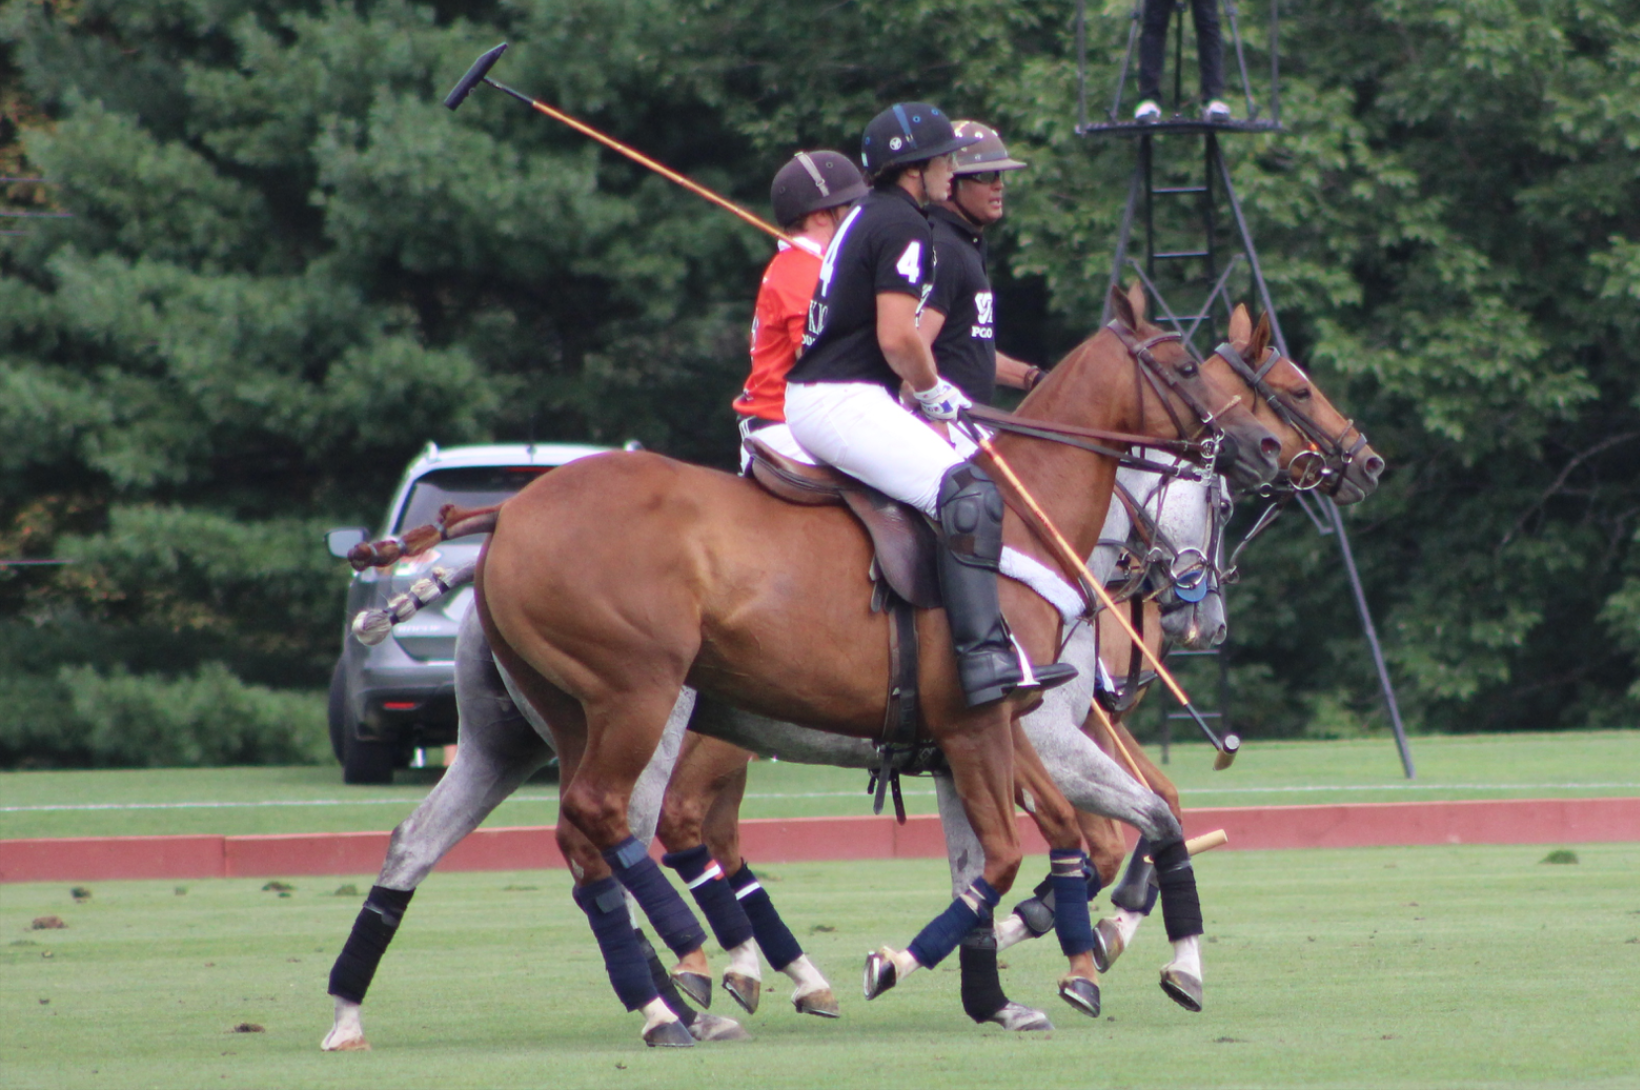  Day 1 of the East Coast Open at Greenwich Polo Club, Sunday, Aug. 23, 2015. 